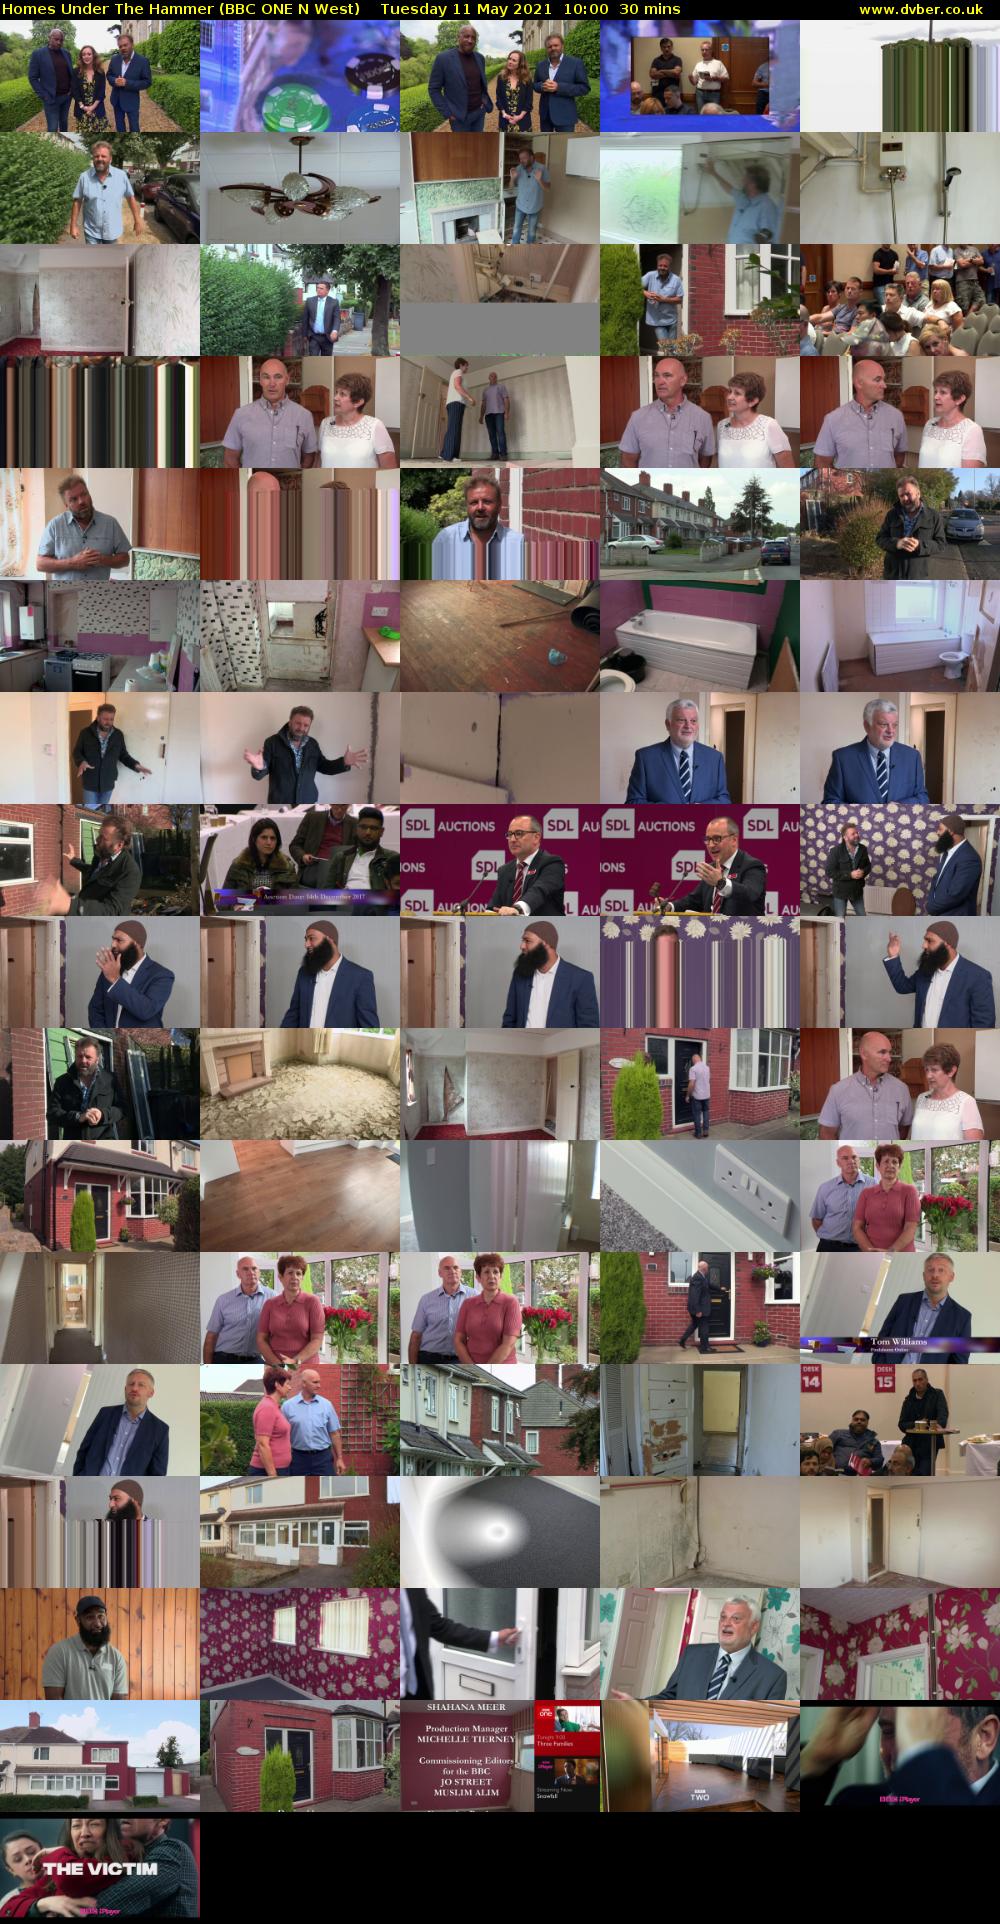 Homes Under The Hammer (BBC ONE N West) Tuesday 11 May 2021 10:00 - 10:30